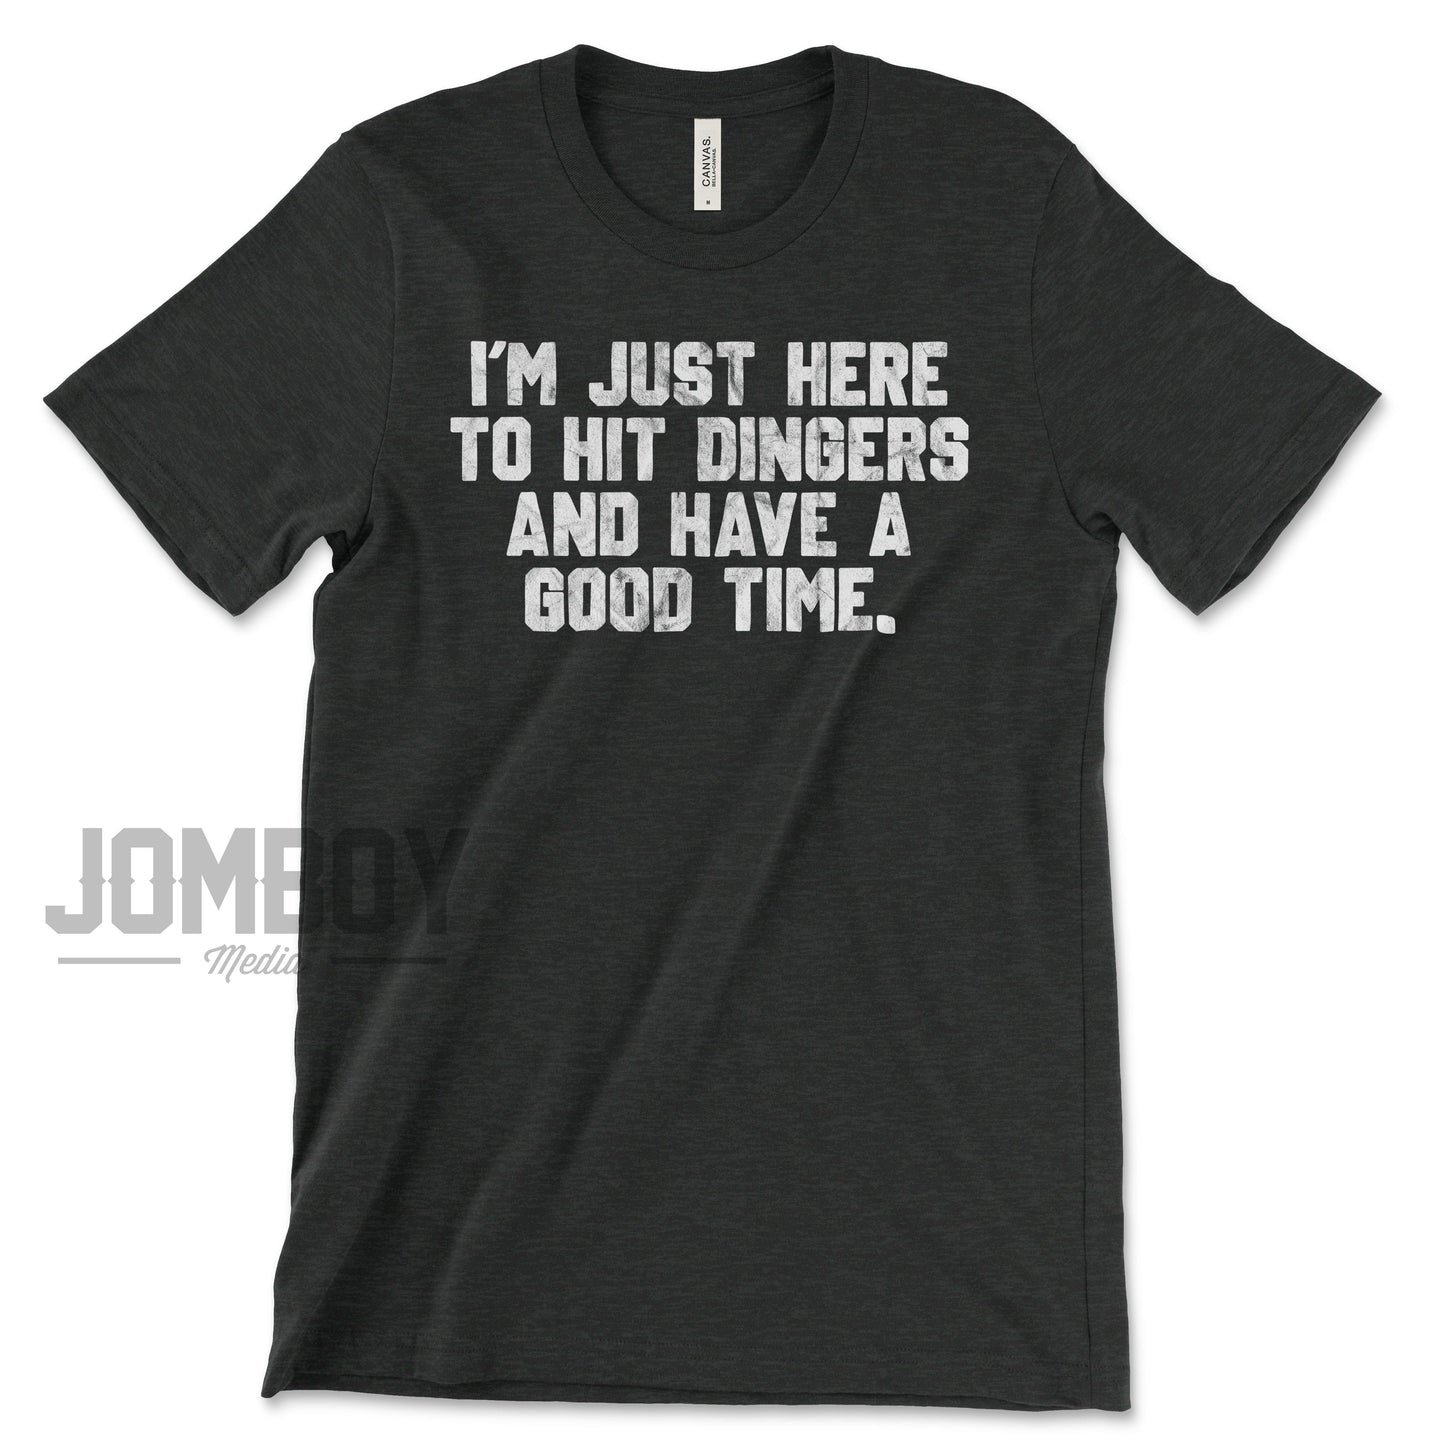 I'm Just Here To Hit Dingers | T-Shirt - Jomboy Media